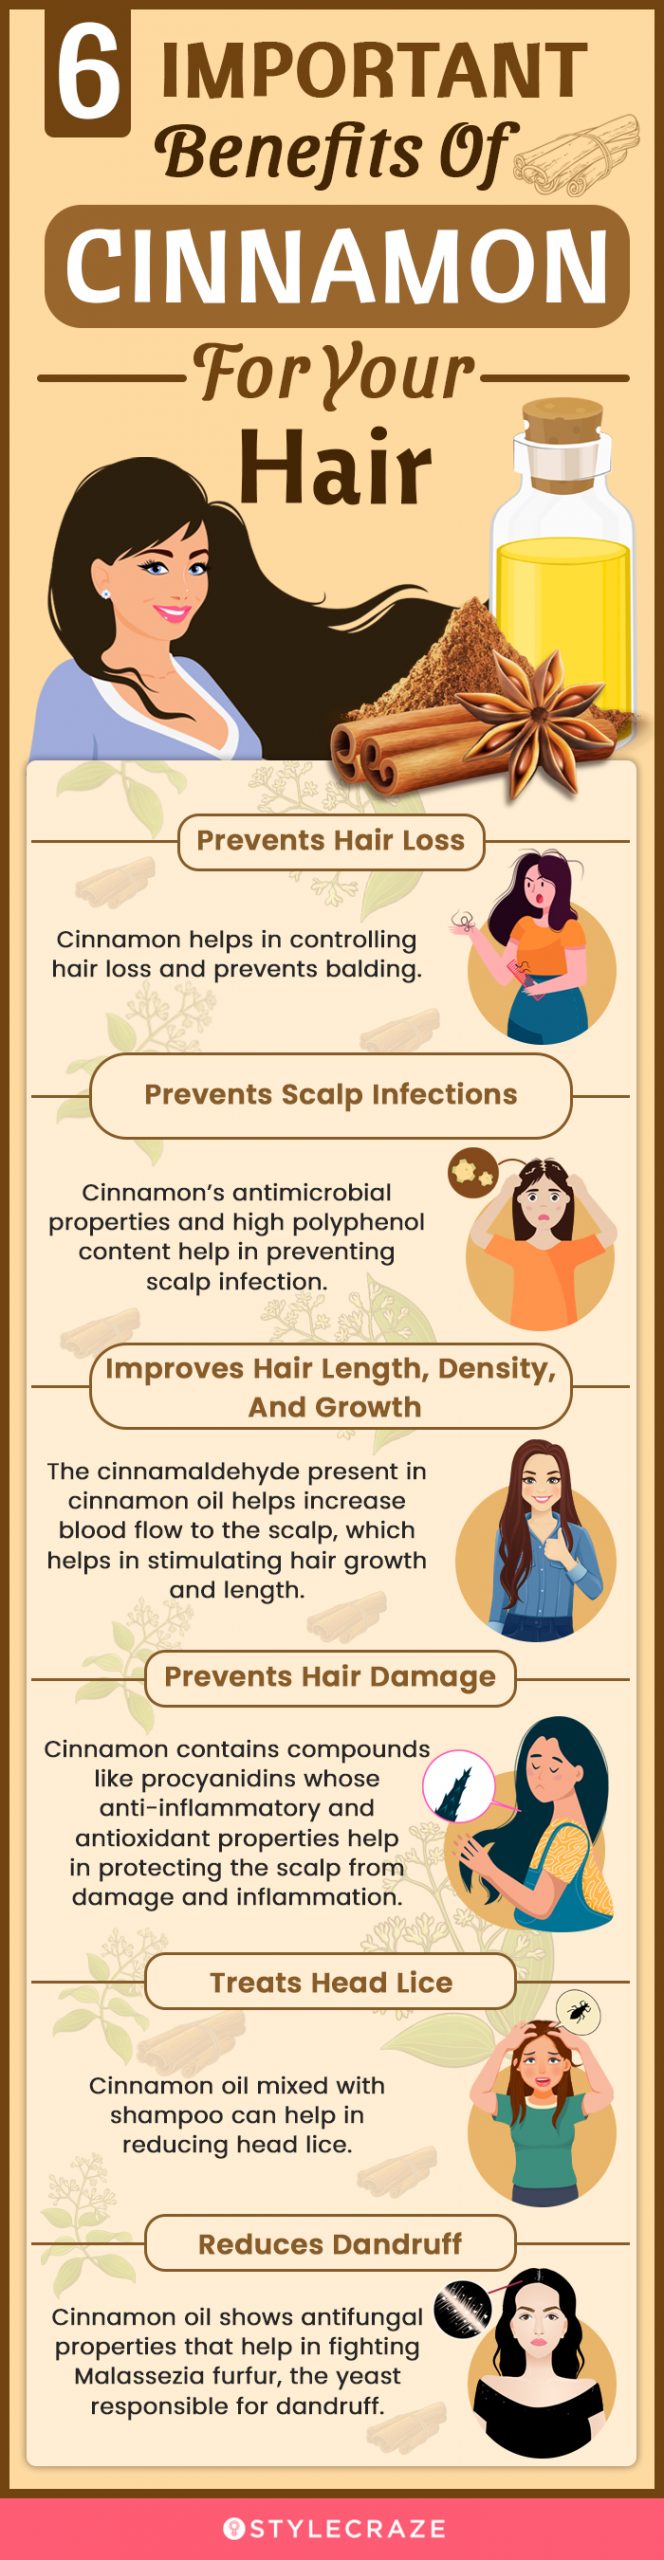 6 important benefits of cinnamon for your hair (infographic)